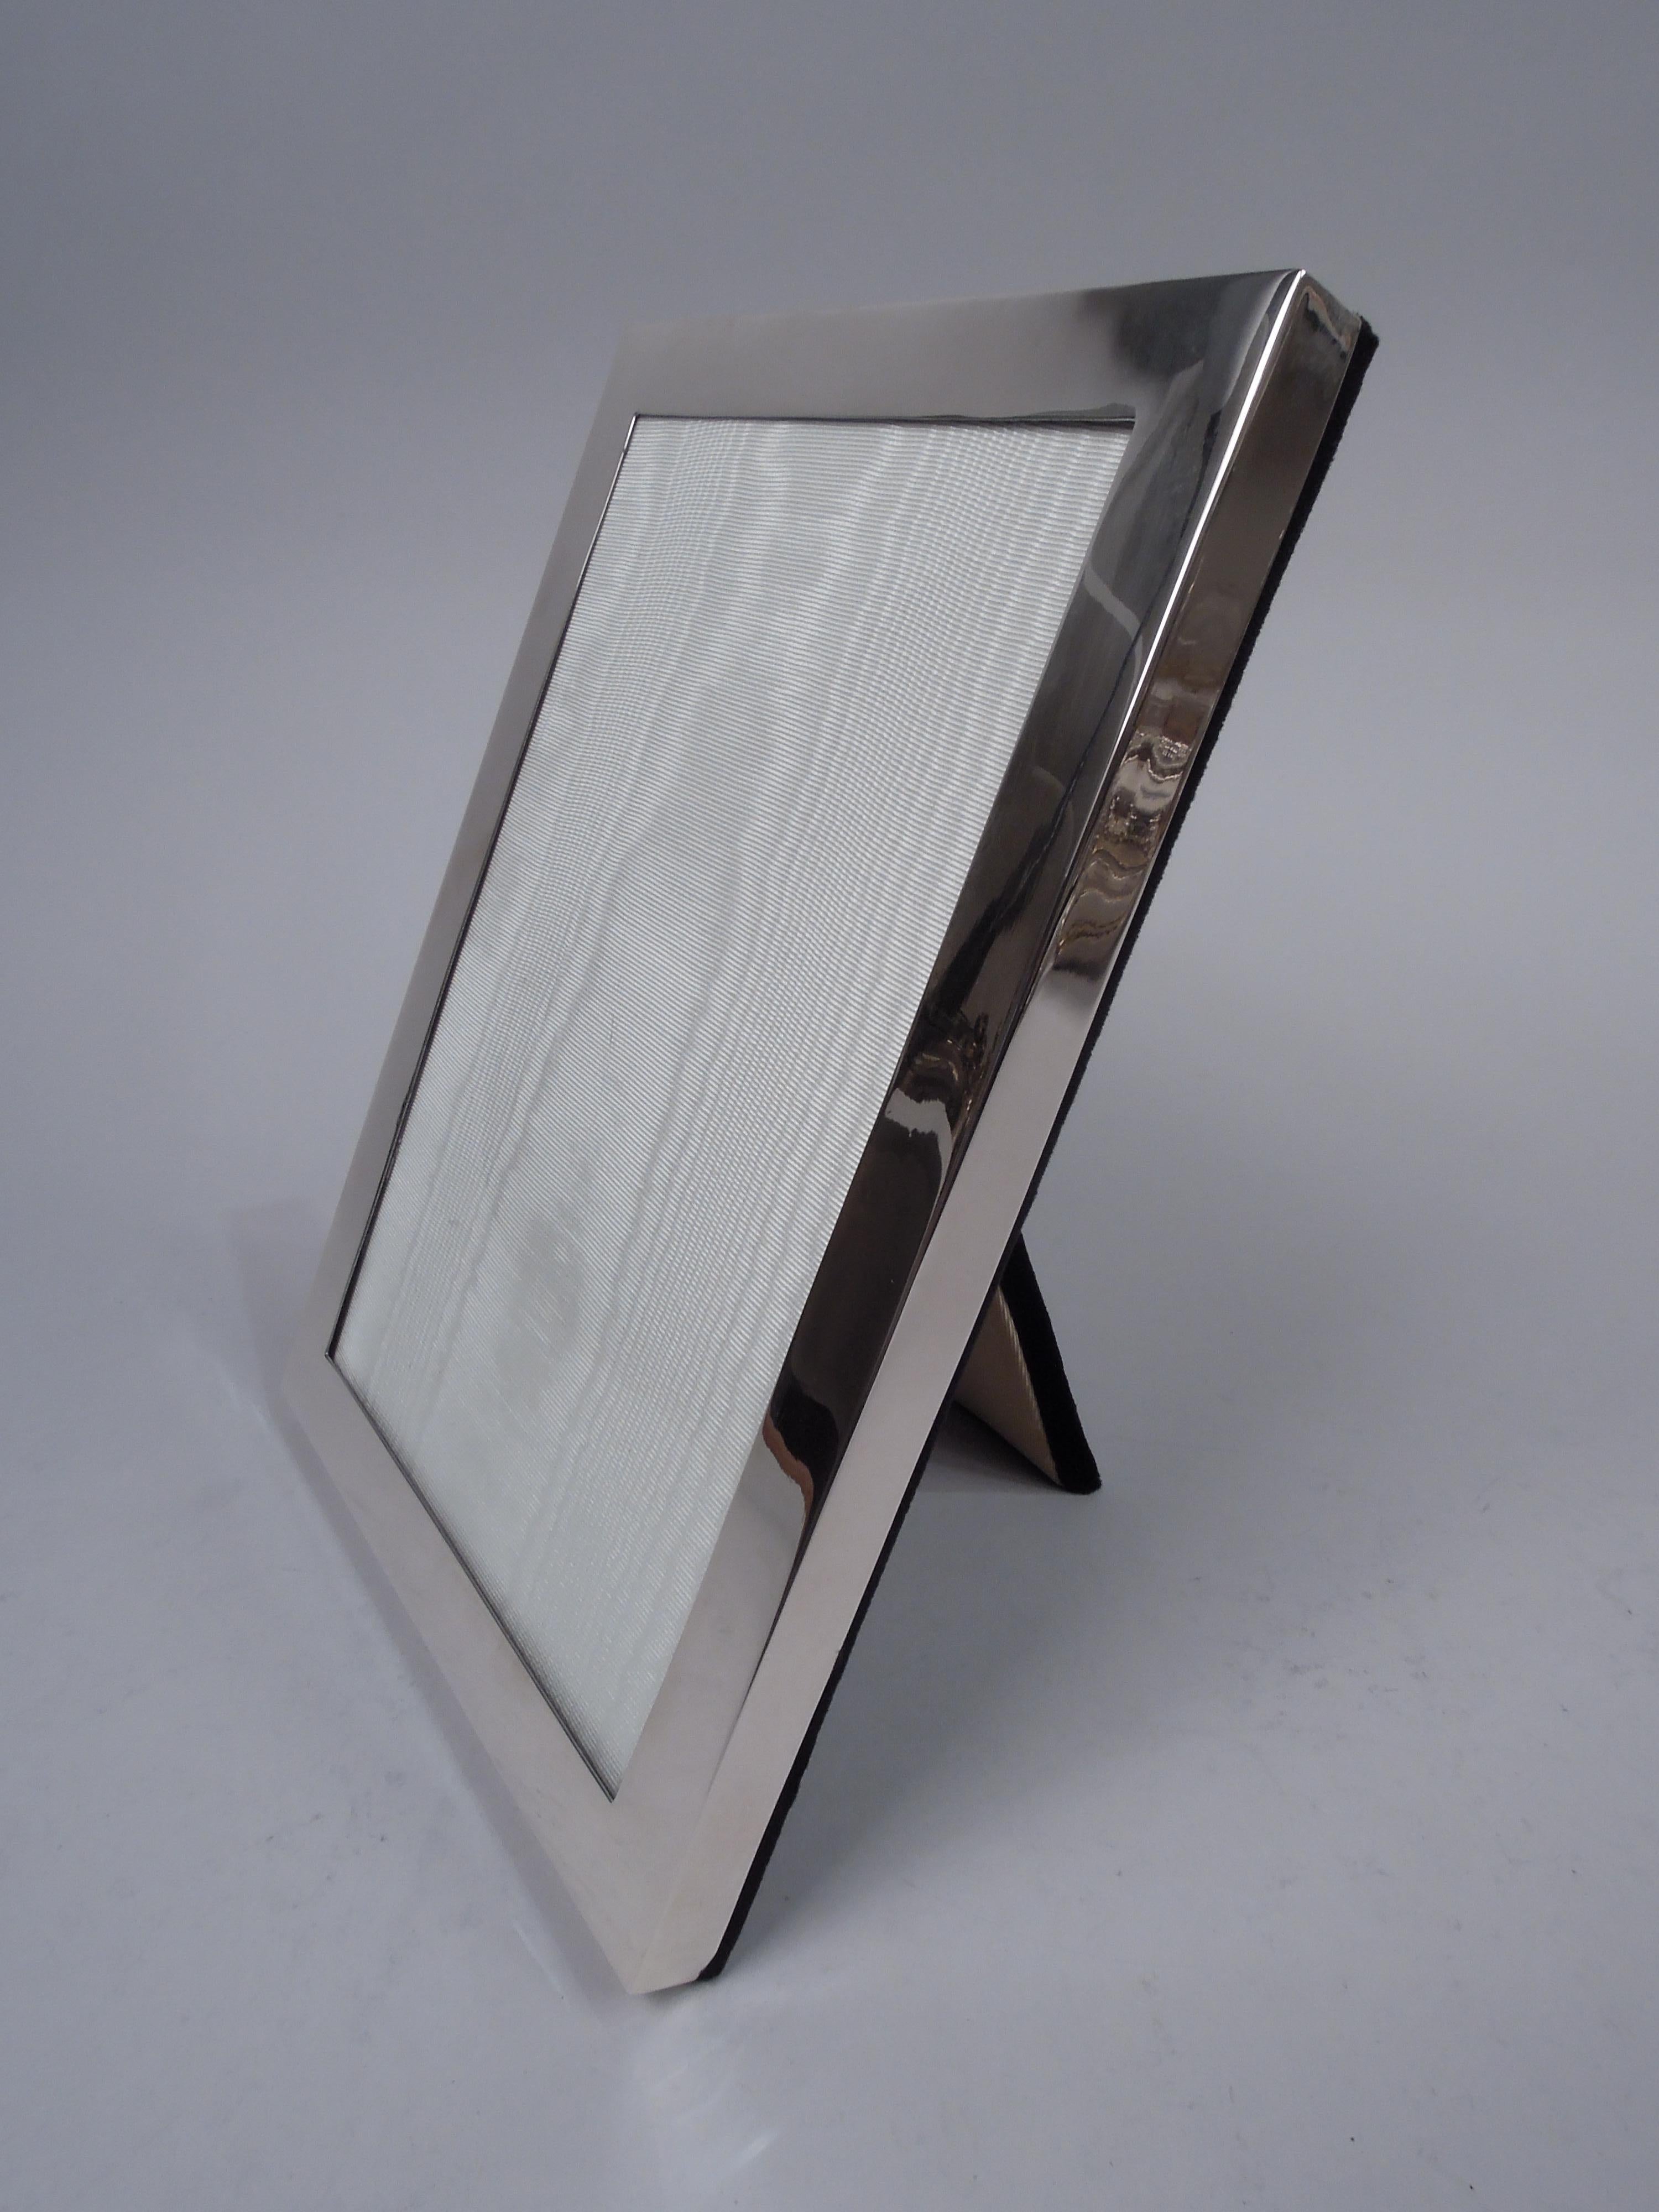 Midcentury Modern sterling silver picture frame. Made by Watrous Mfg. Co. (part of International) in Wallingford, Conn. Rectangular window in clean and unadorned flat surround. With glass, silk lining, and velvet back and hinged easel support for